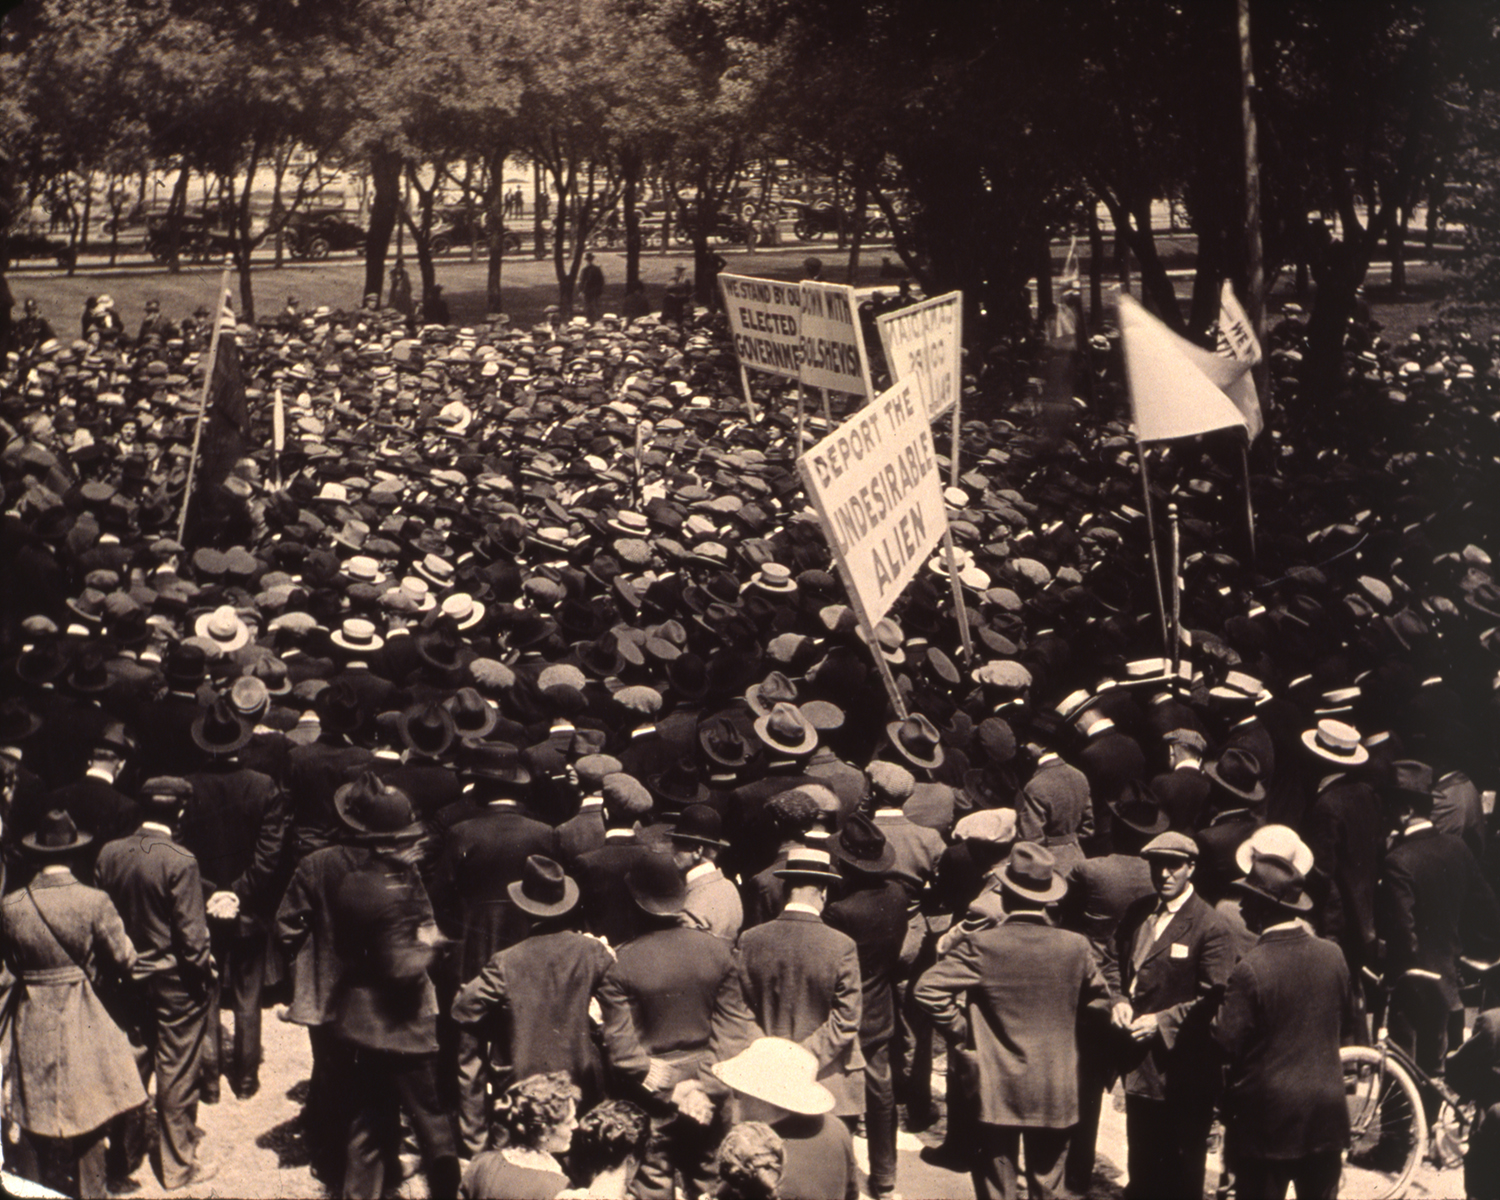 Returned soldiers demonstrate against the strike at Broadway and Kennedy. WCPI A1292-38696, UWA.